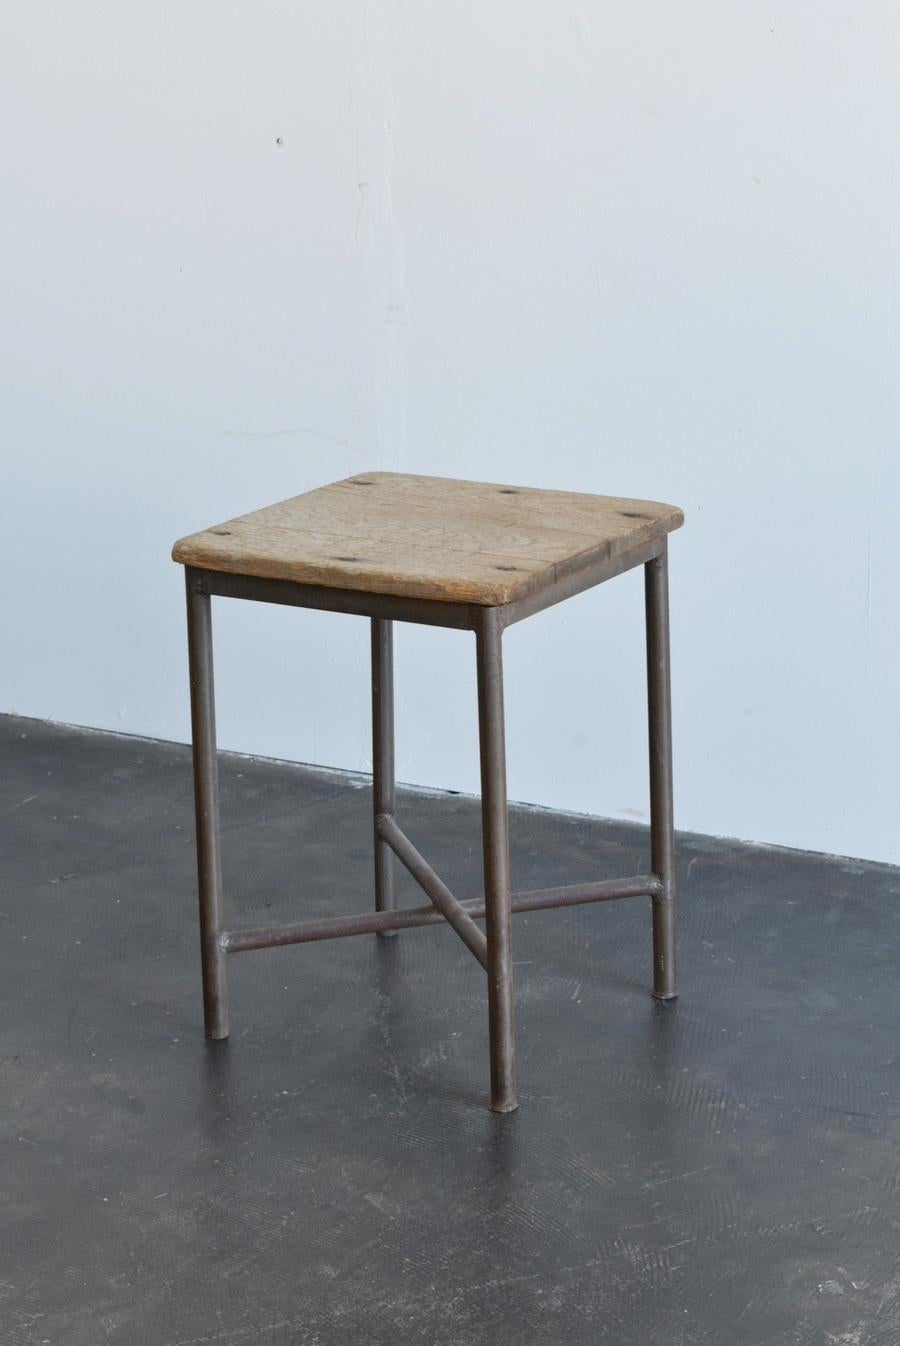 This is a stool used at Minoya Elementary School in Gunma Prefecture, Japan.
The back of the seat has the name of the school and the fact that it was built in 1965.

A simple stool with an oak top and iron legs.
Two plastic parts on the toe are